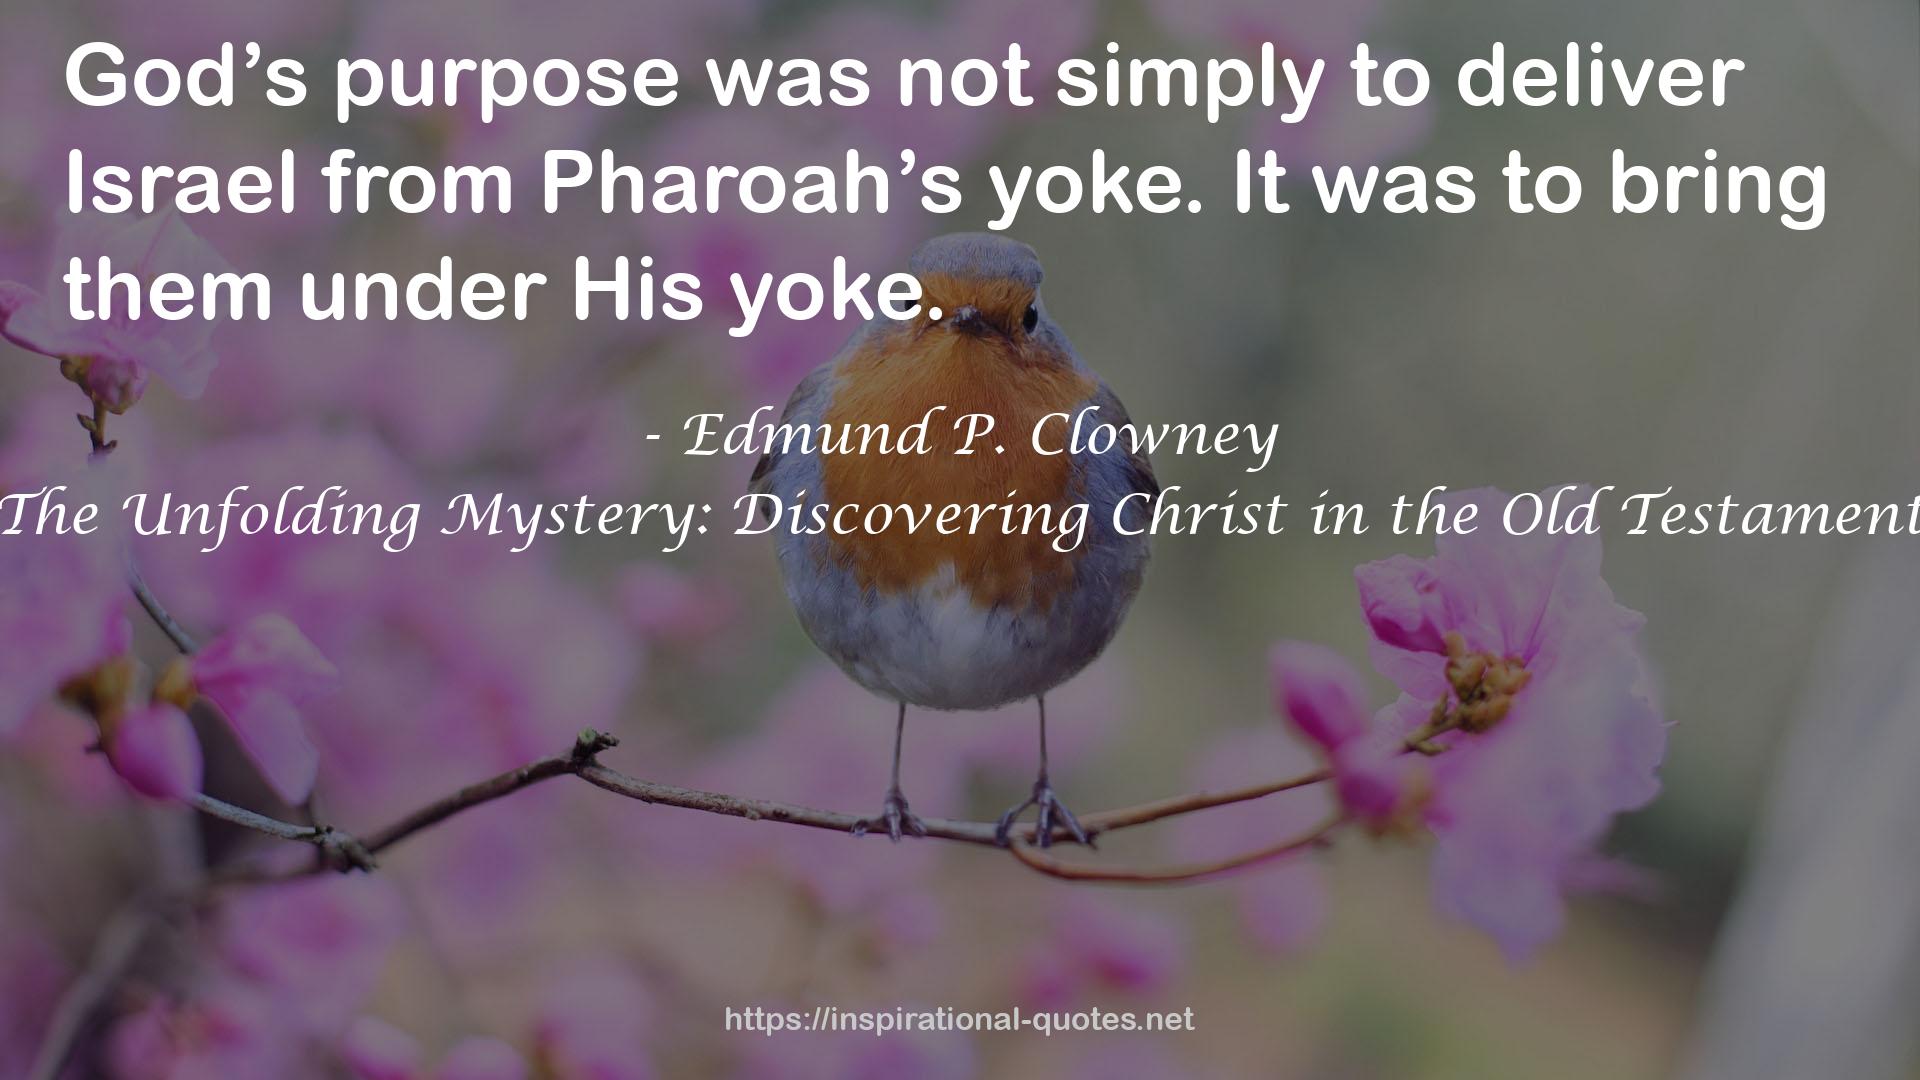 The Unfolding Mystery: Discovering Christ in the Old Testament QUOTES